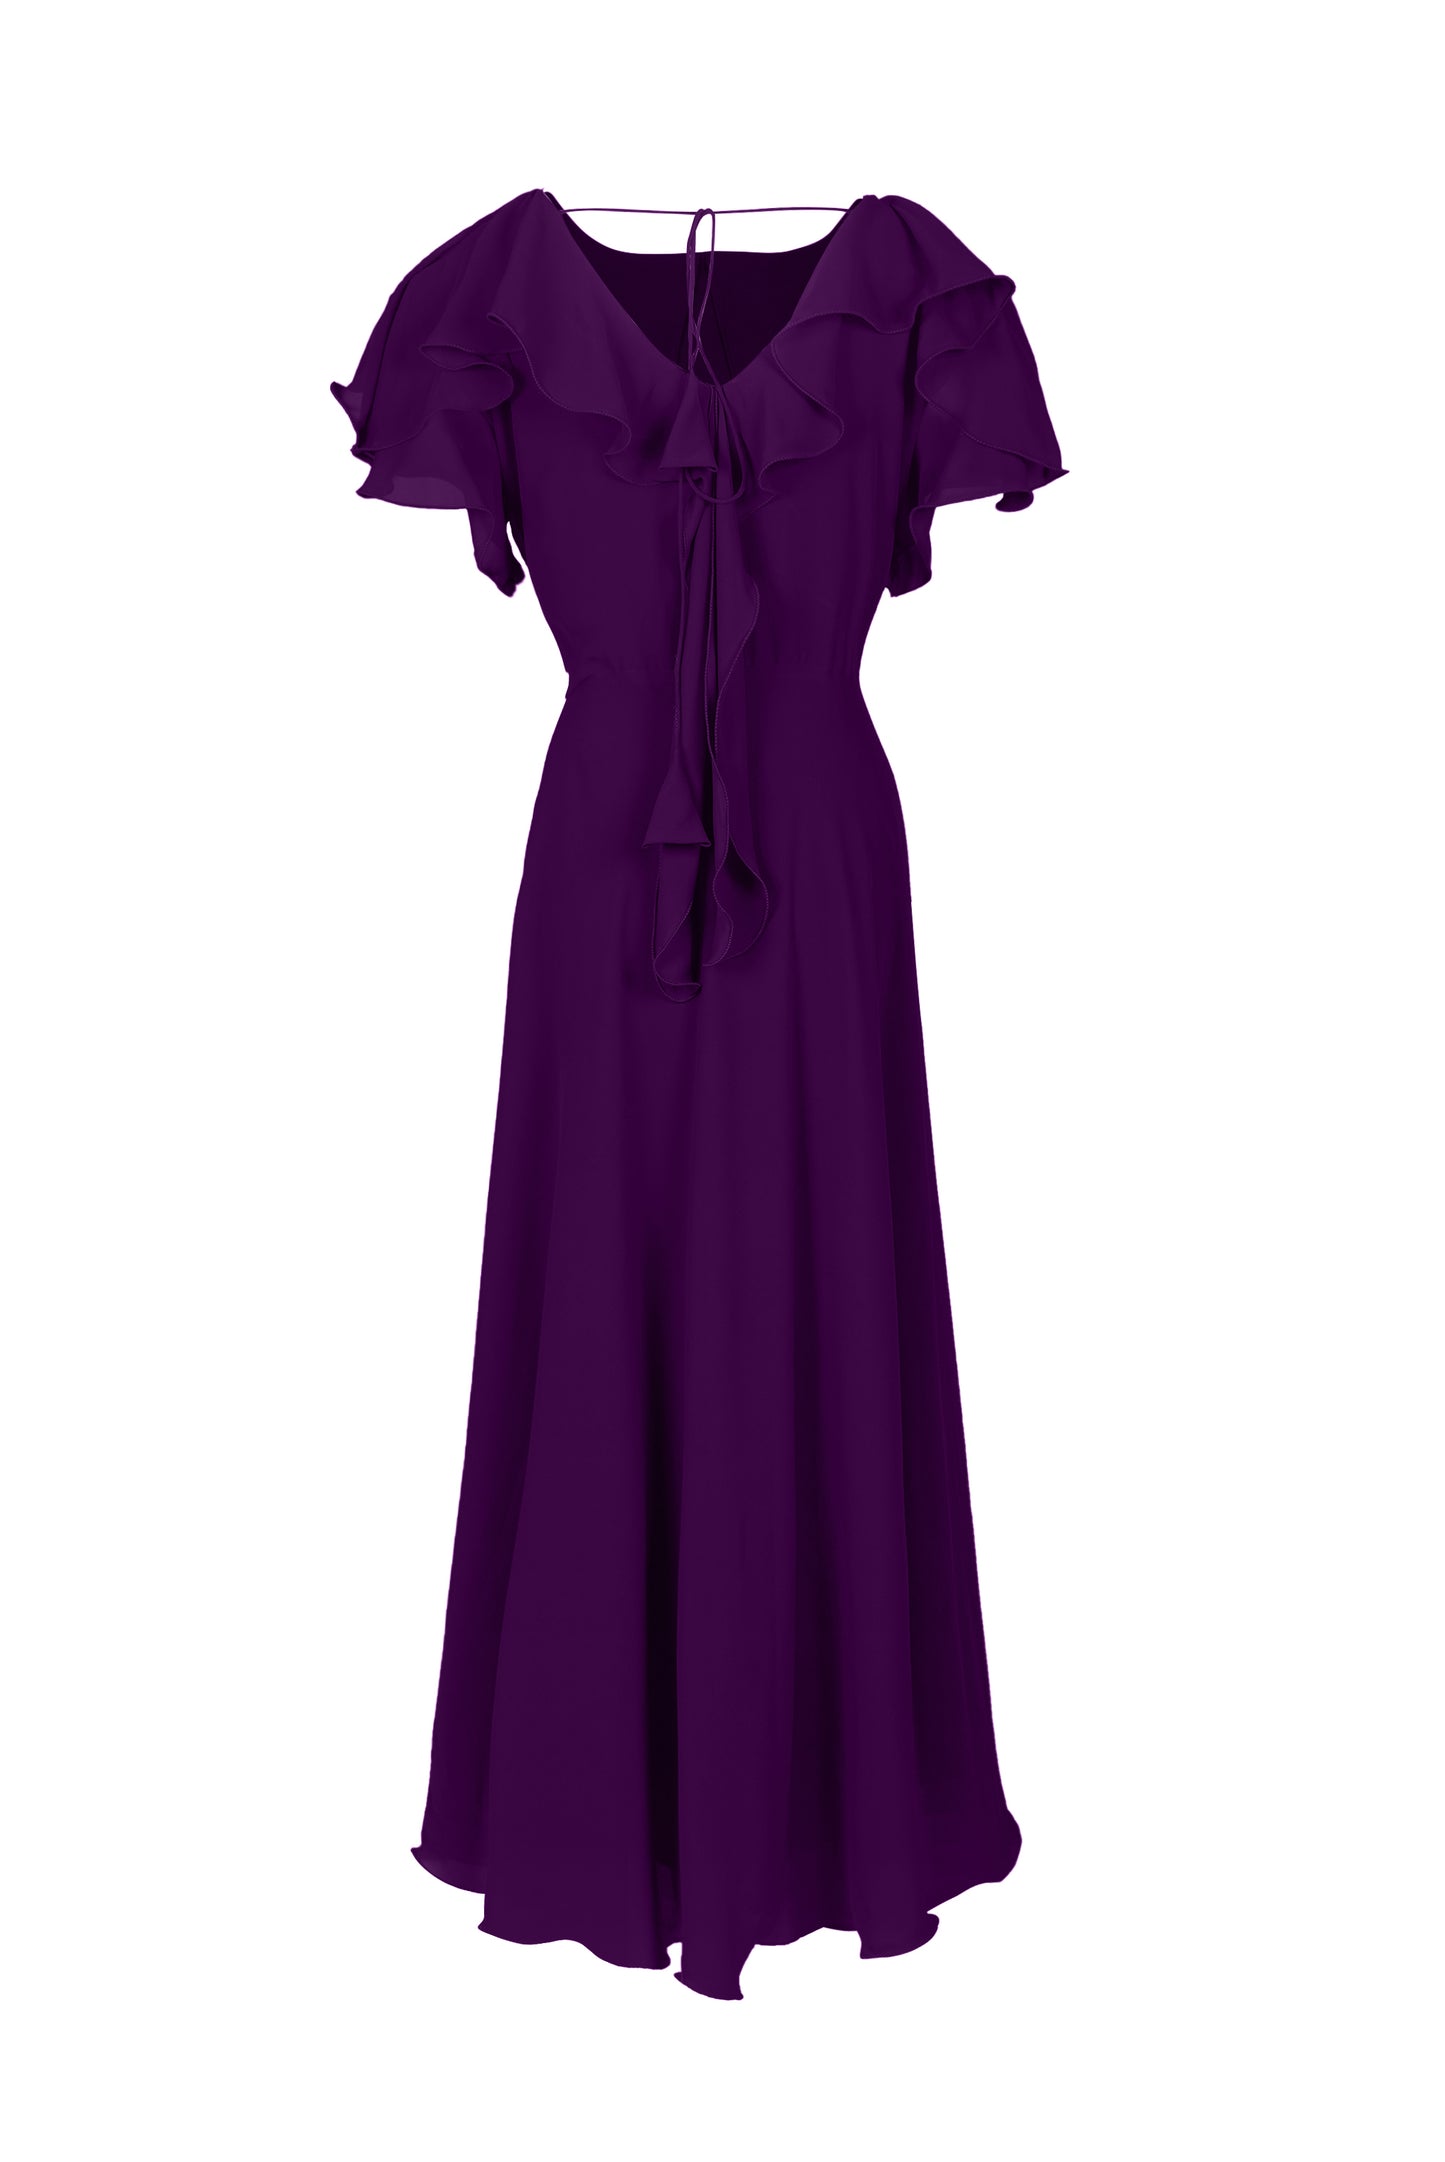 ZIA041 Violet Flared Georgette Gown.